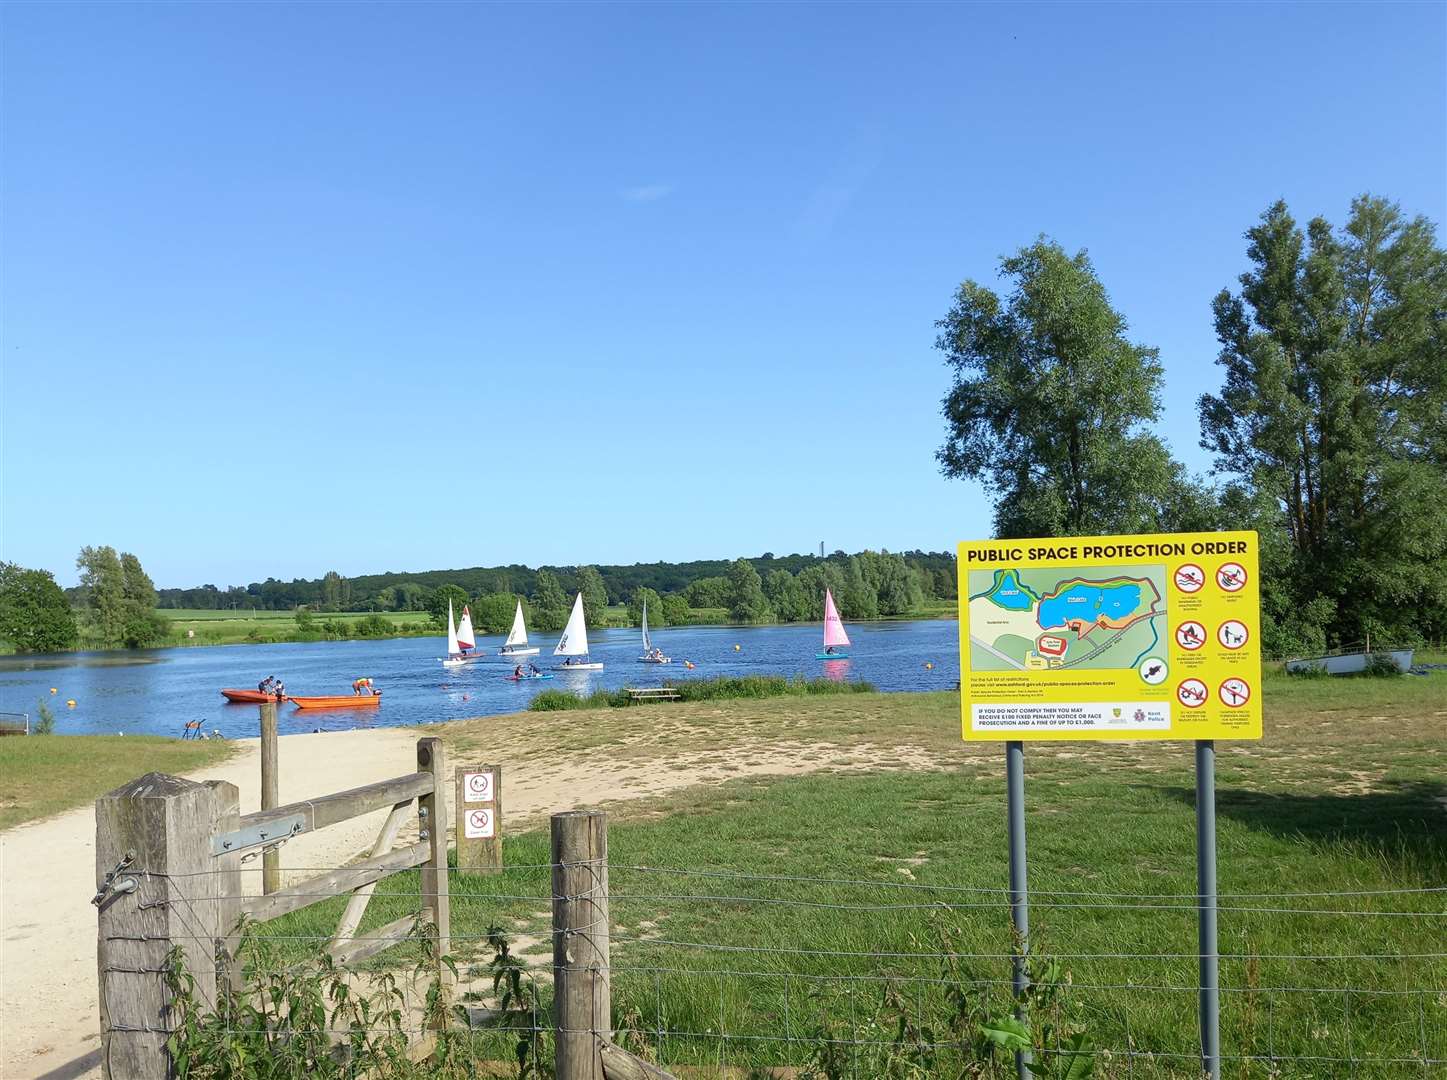 Watersports are currently suspended at Conningbrook Lakes